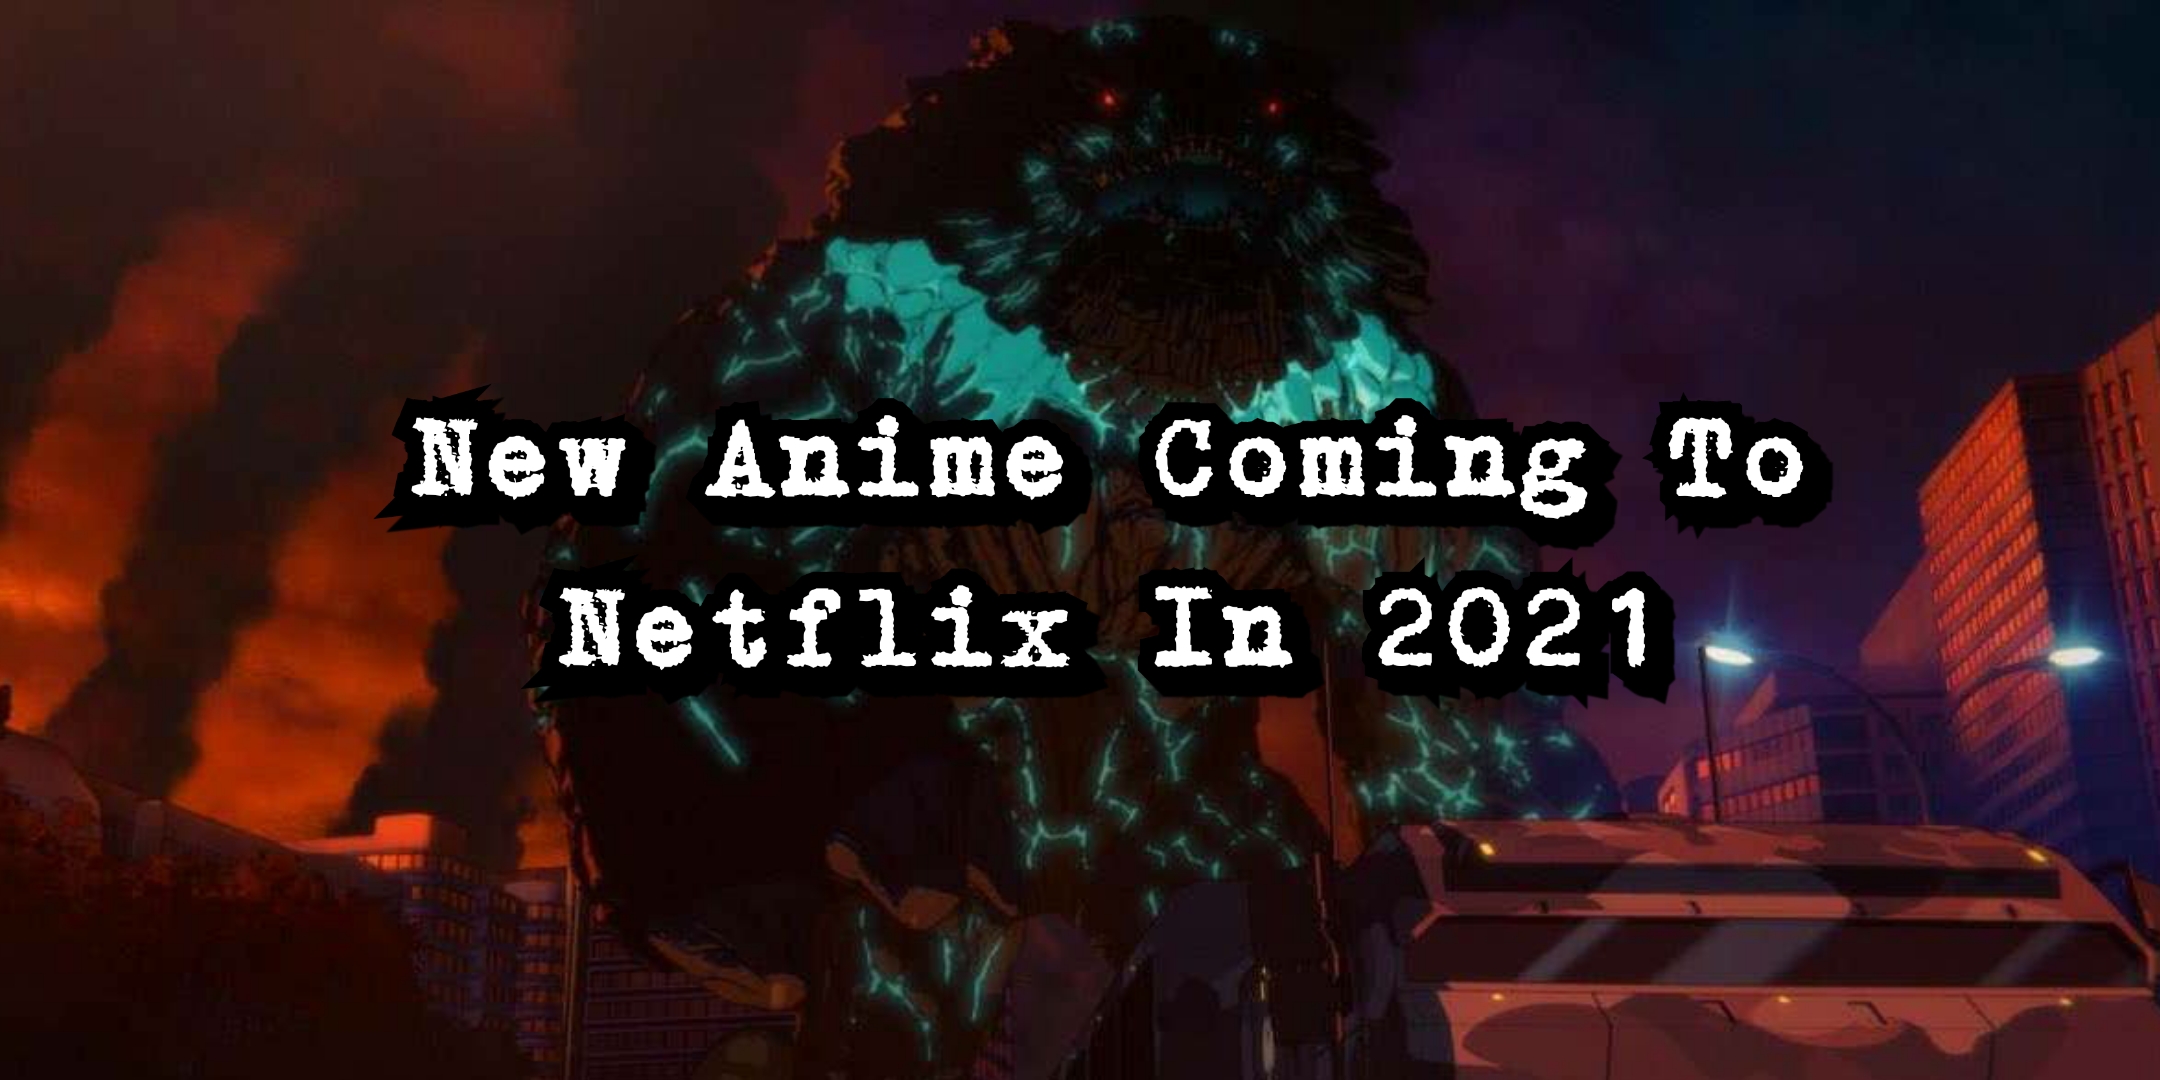 Anime Coming to Netflix in 2020 - What's on Netflix